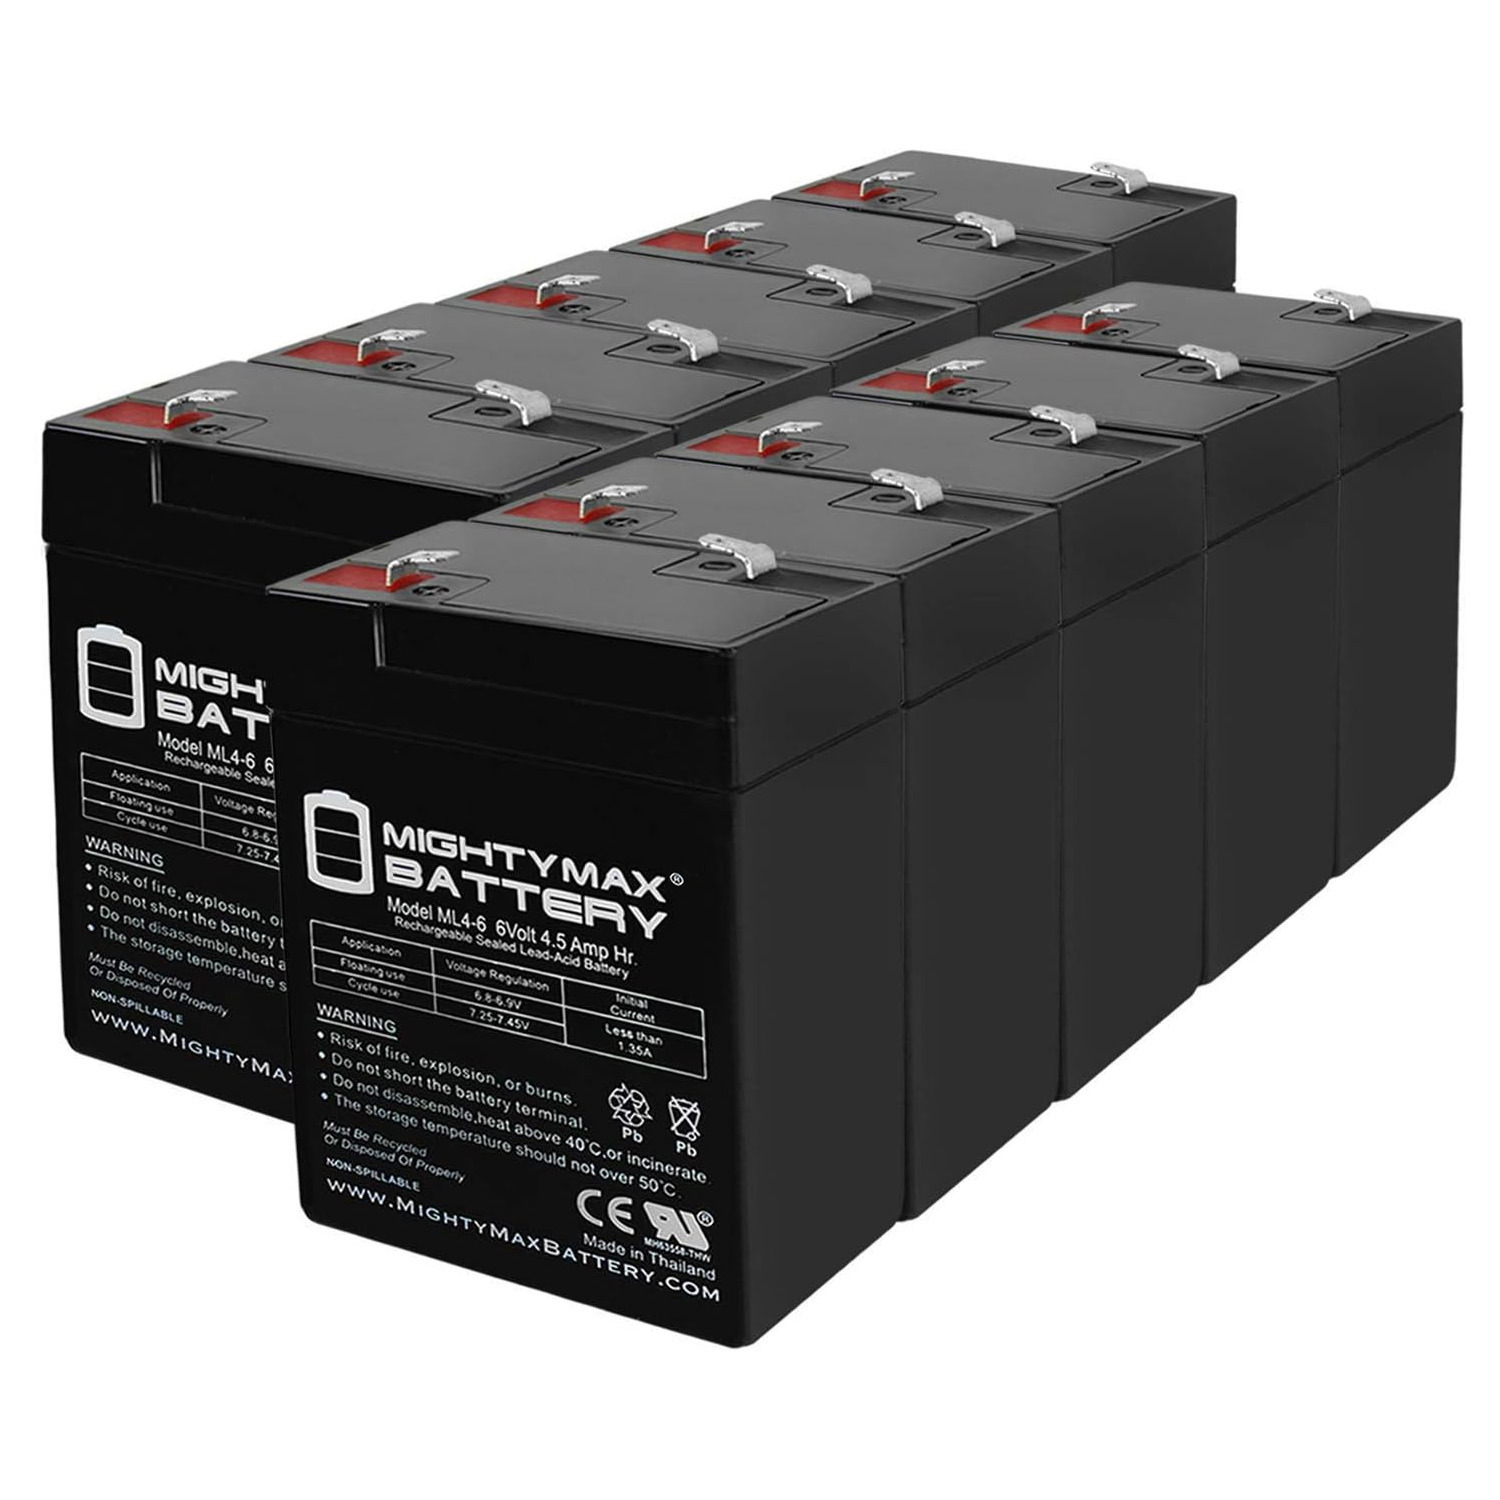 6V 4.5AH Replacement Battery for PBQ 4.5-6 - 10 Pack